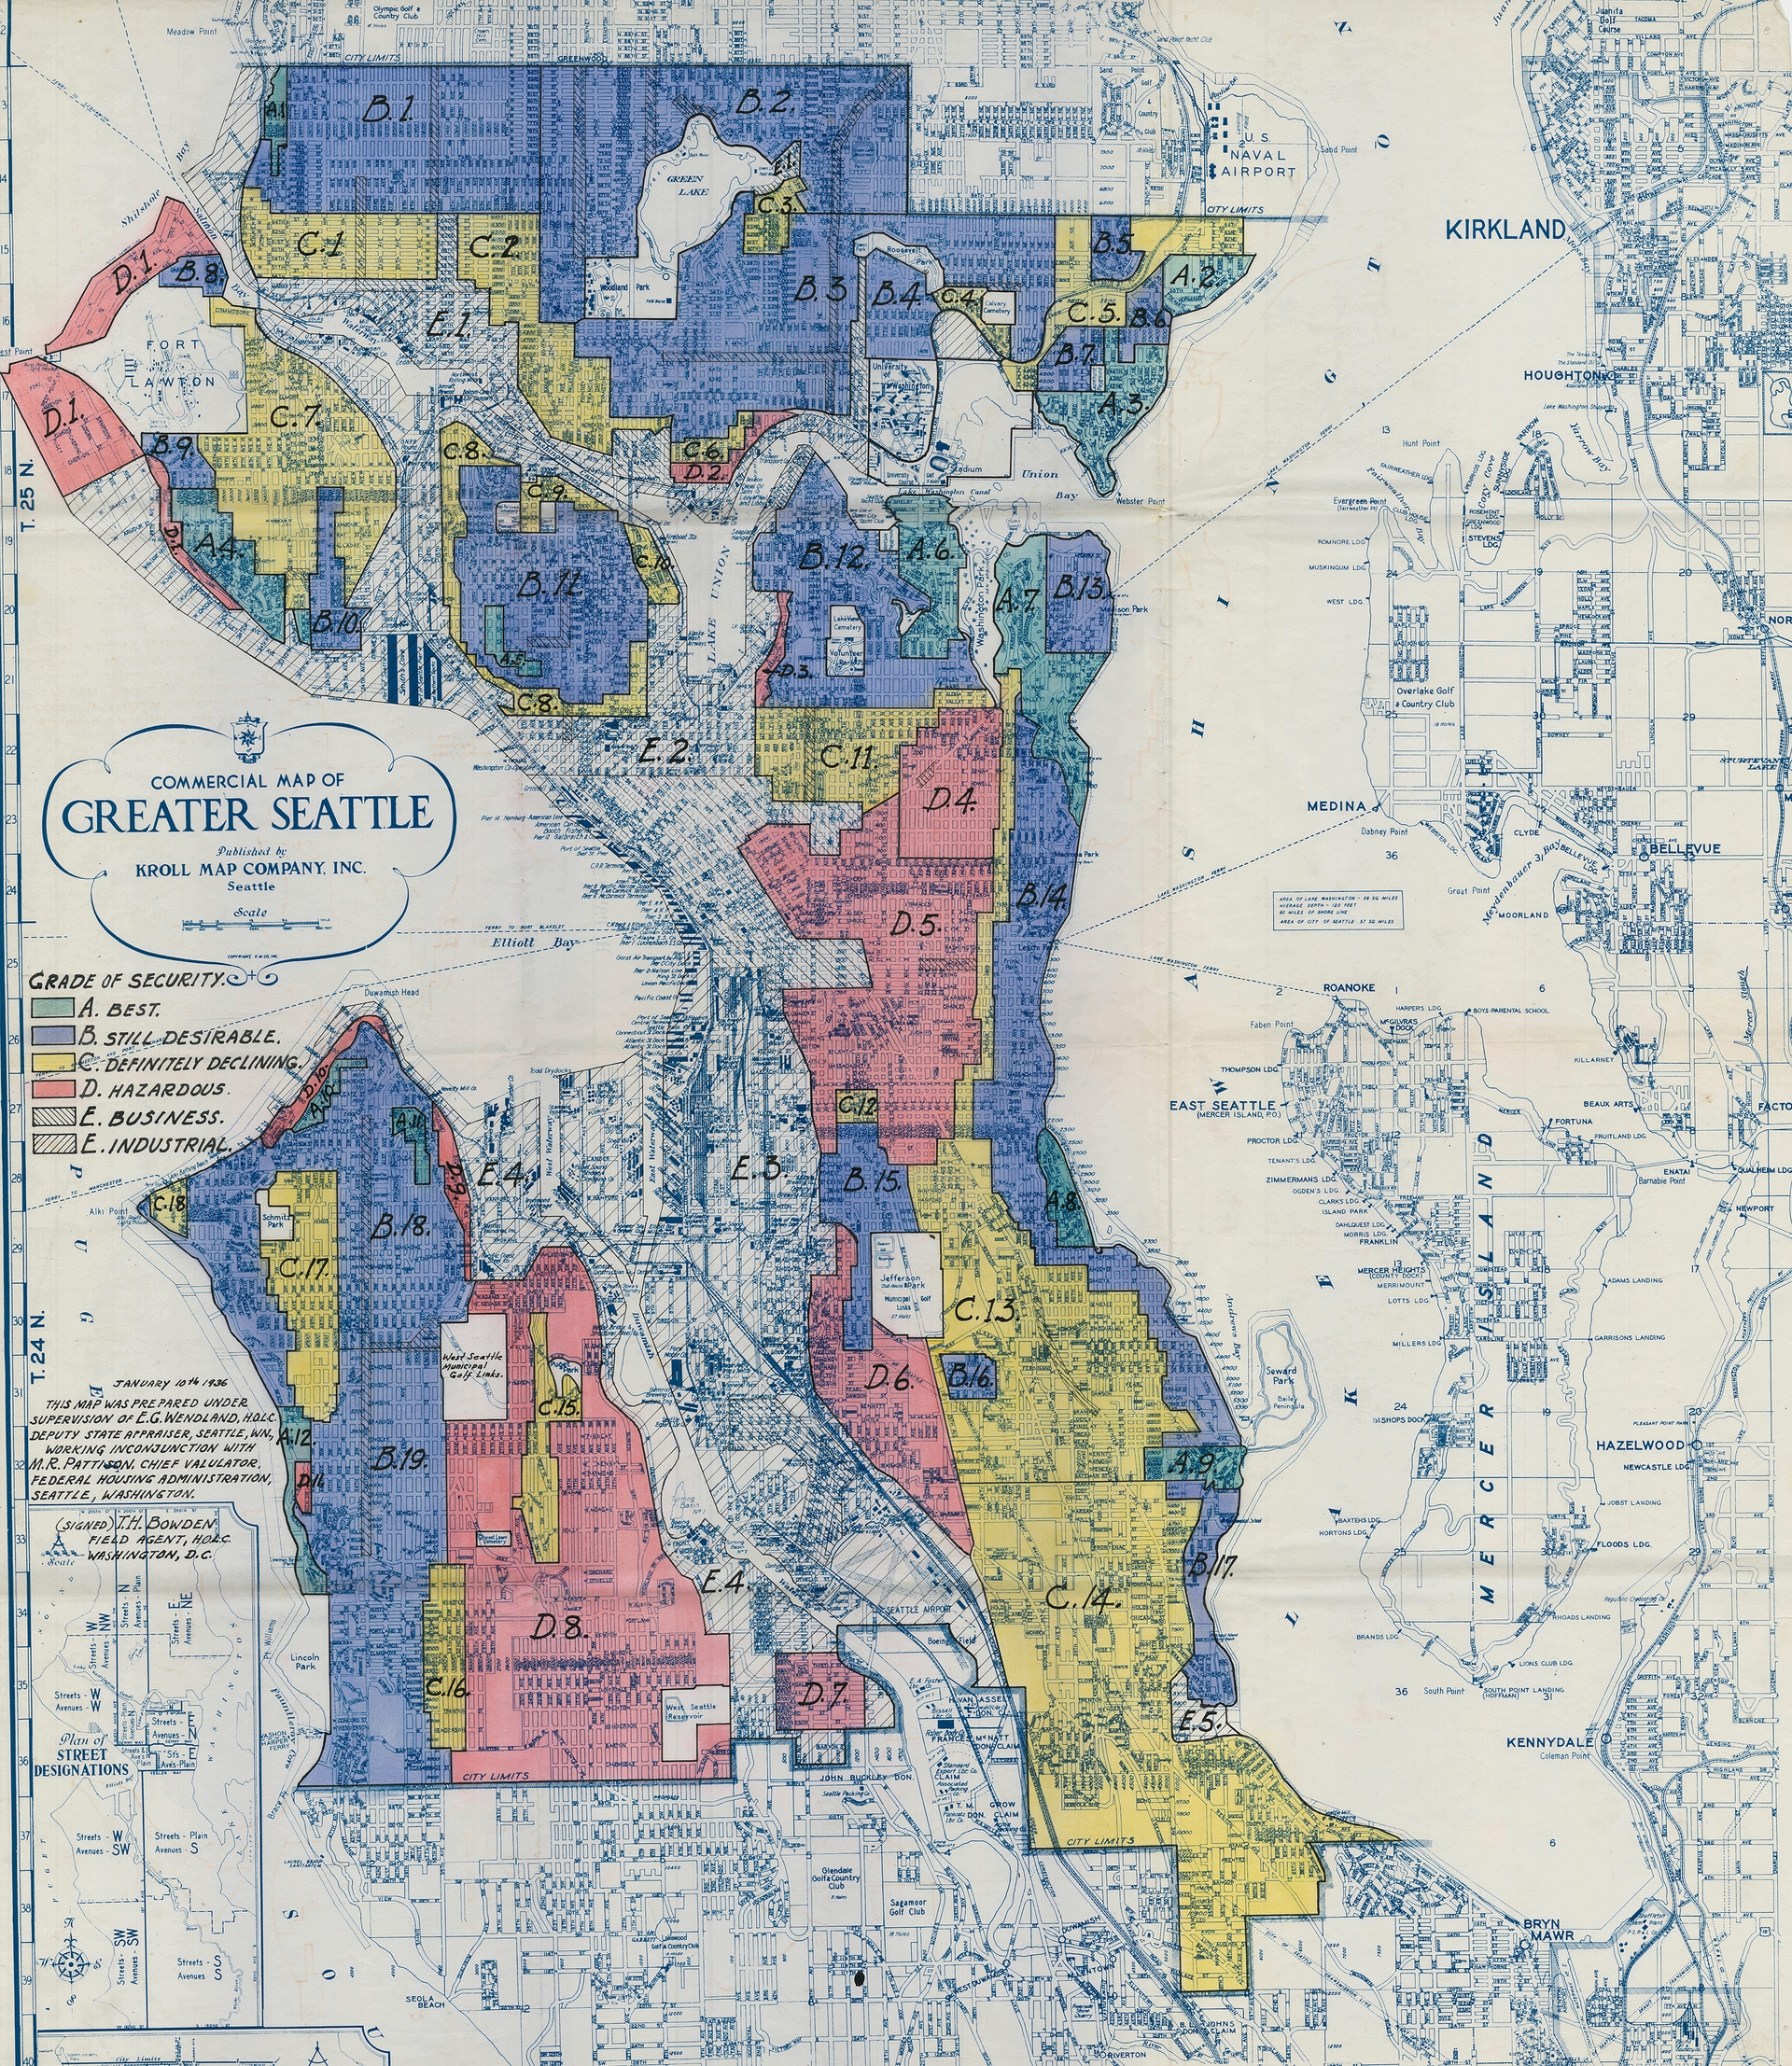 From 1935 to 1940, the HOLC created residential security maps for 239 metropolitan areas across the nation. This legacy lingers as nearly three-quarters of neighborhoods marked "hazardous" during the New Deal era are now low or moderate income neighborhoods.